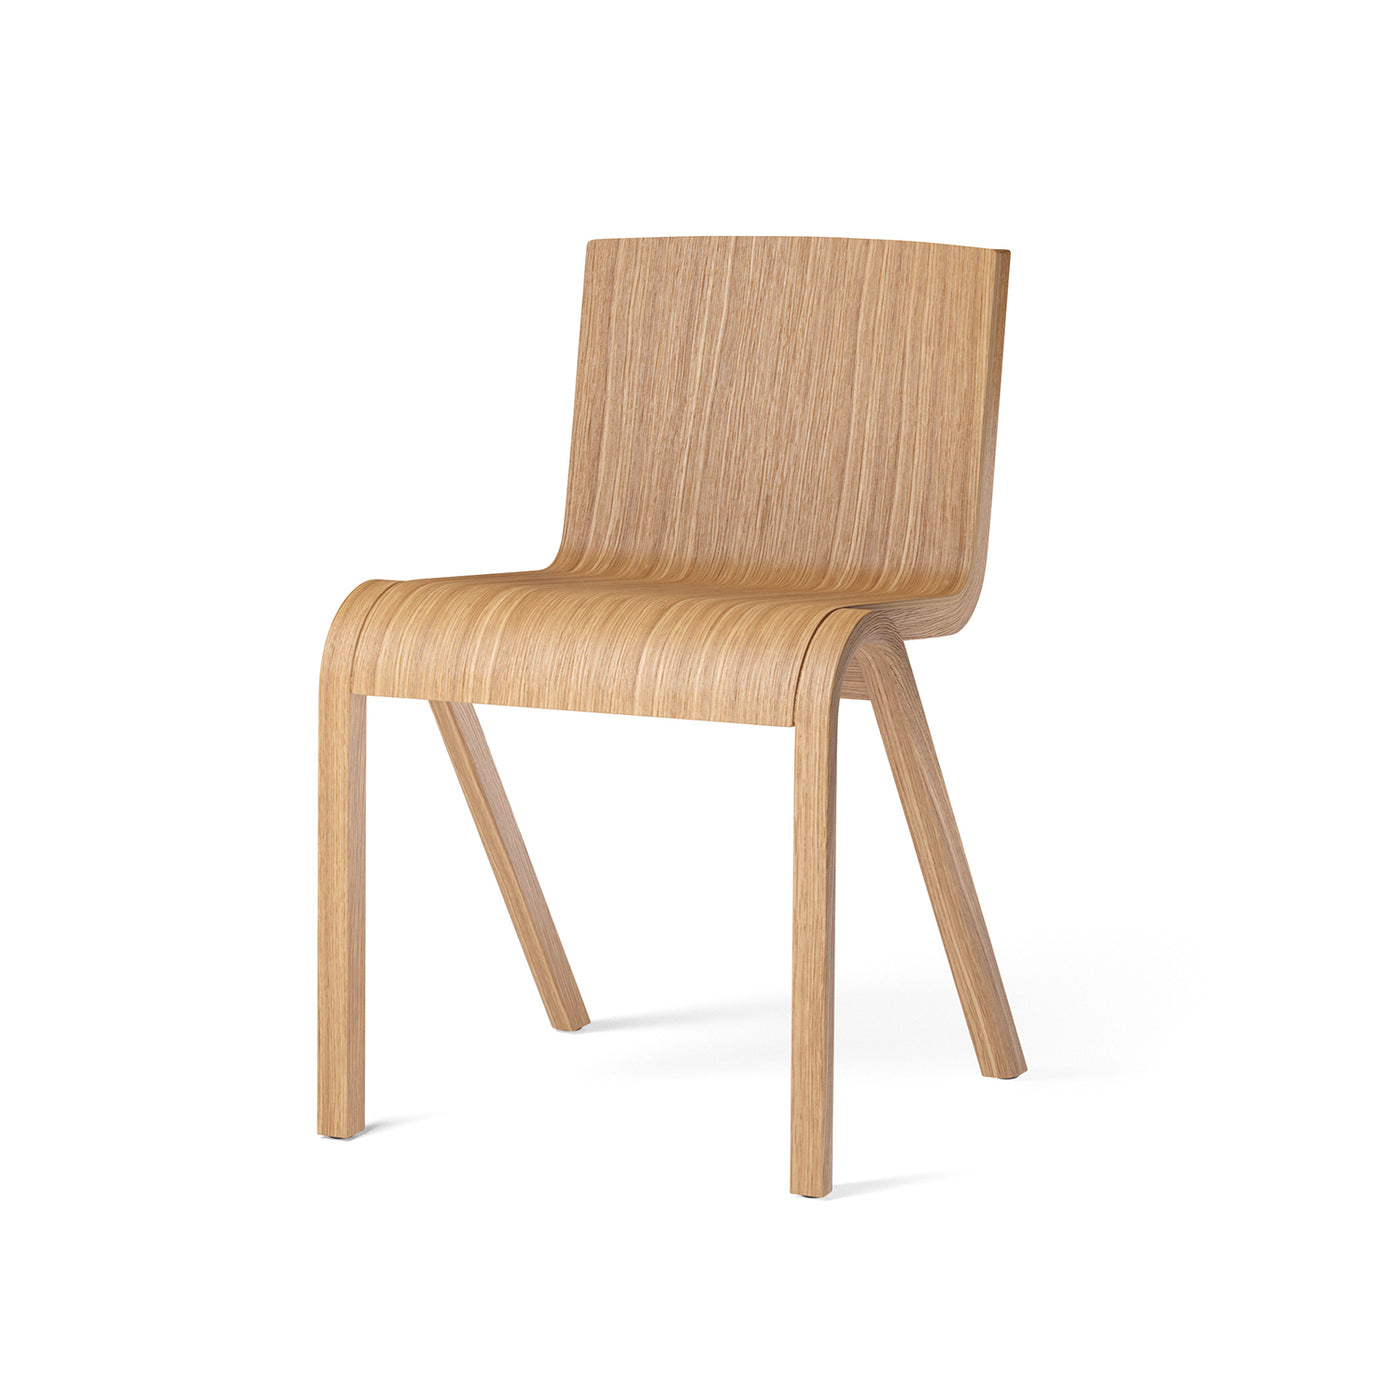 READY dining chair